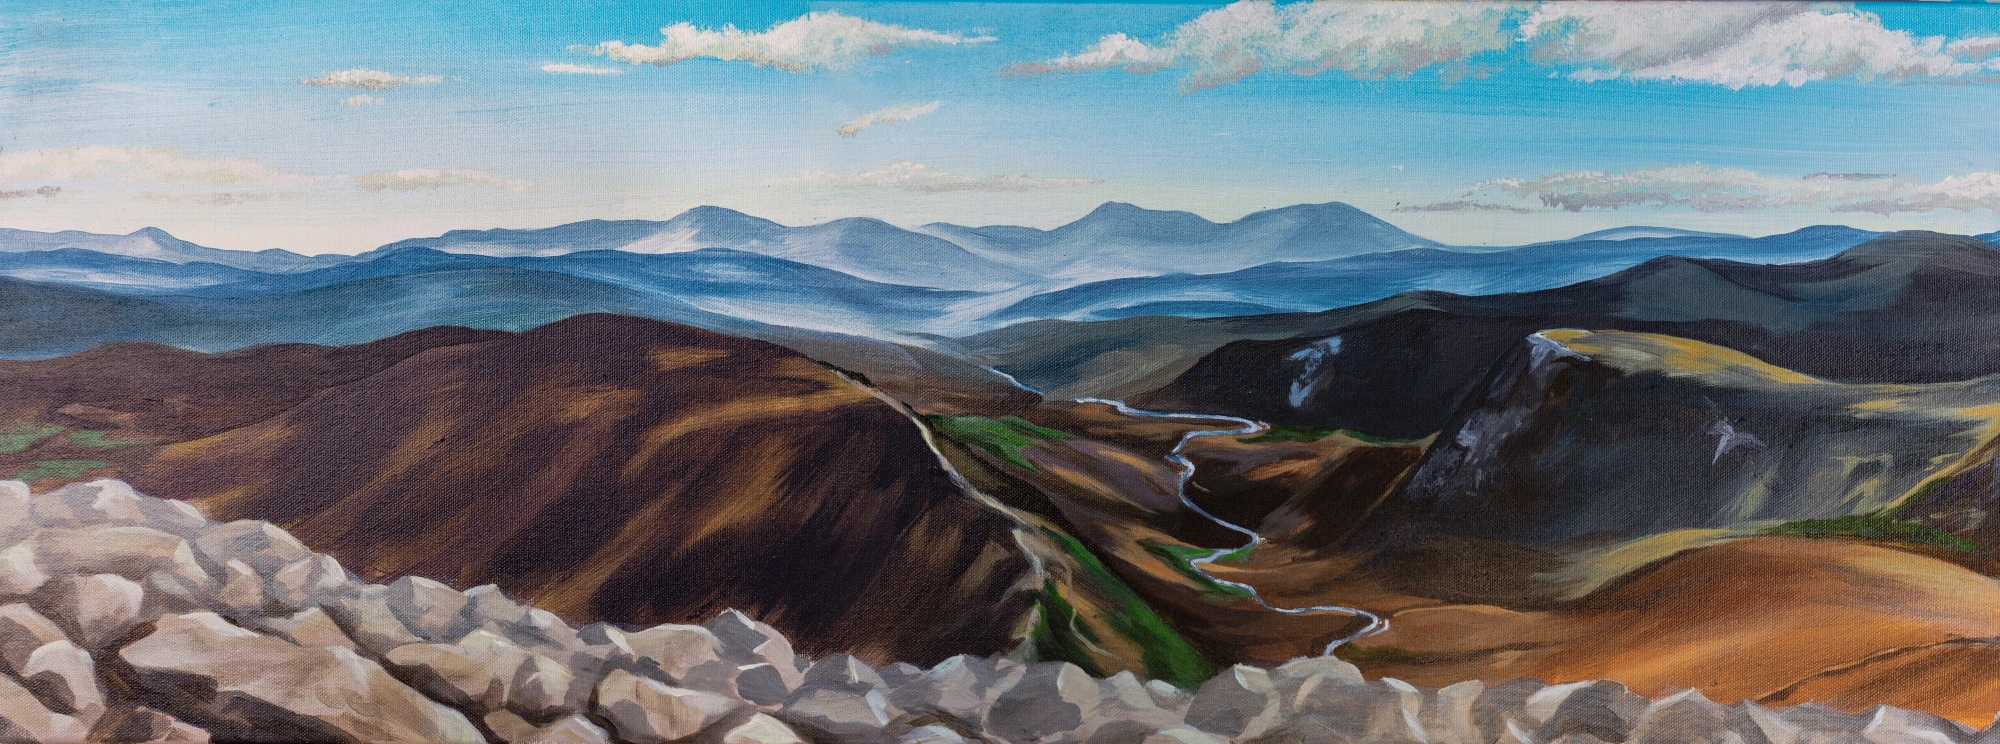 Painting of a landscape from the top of a mountain